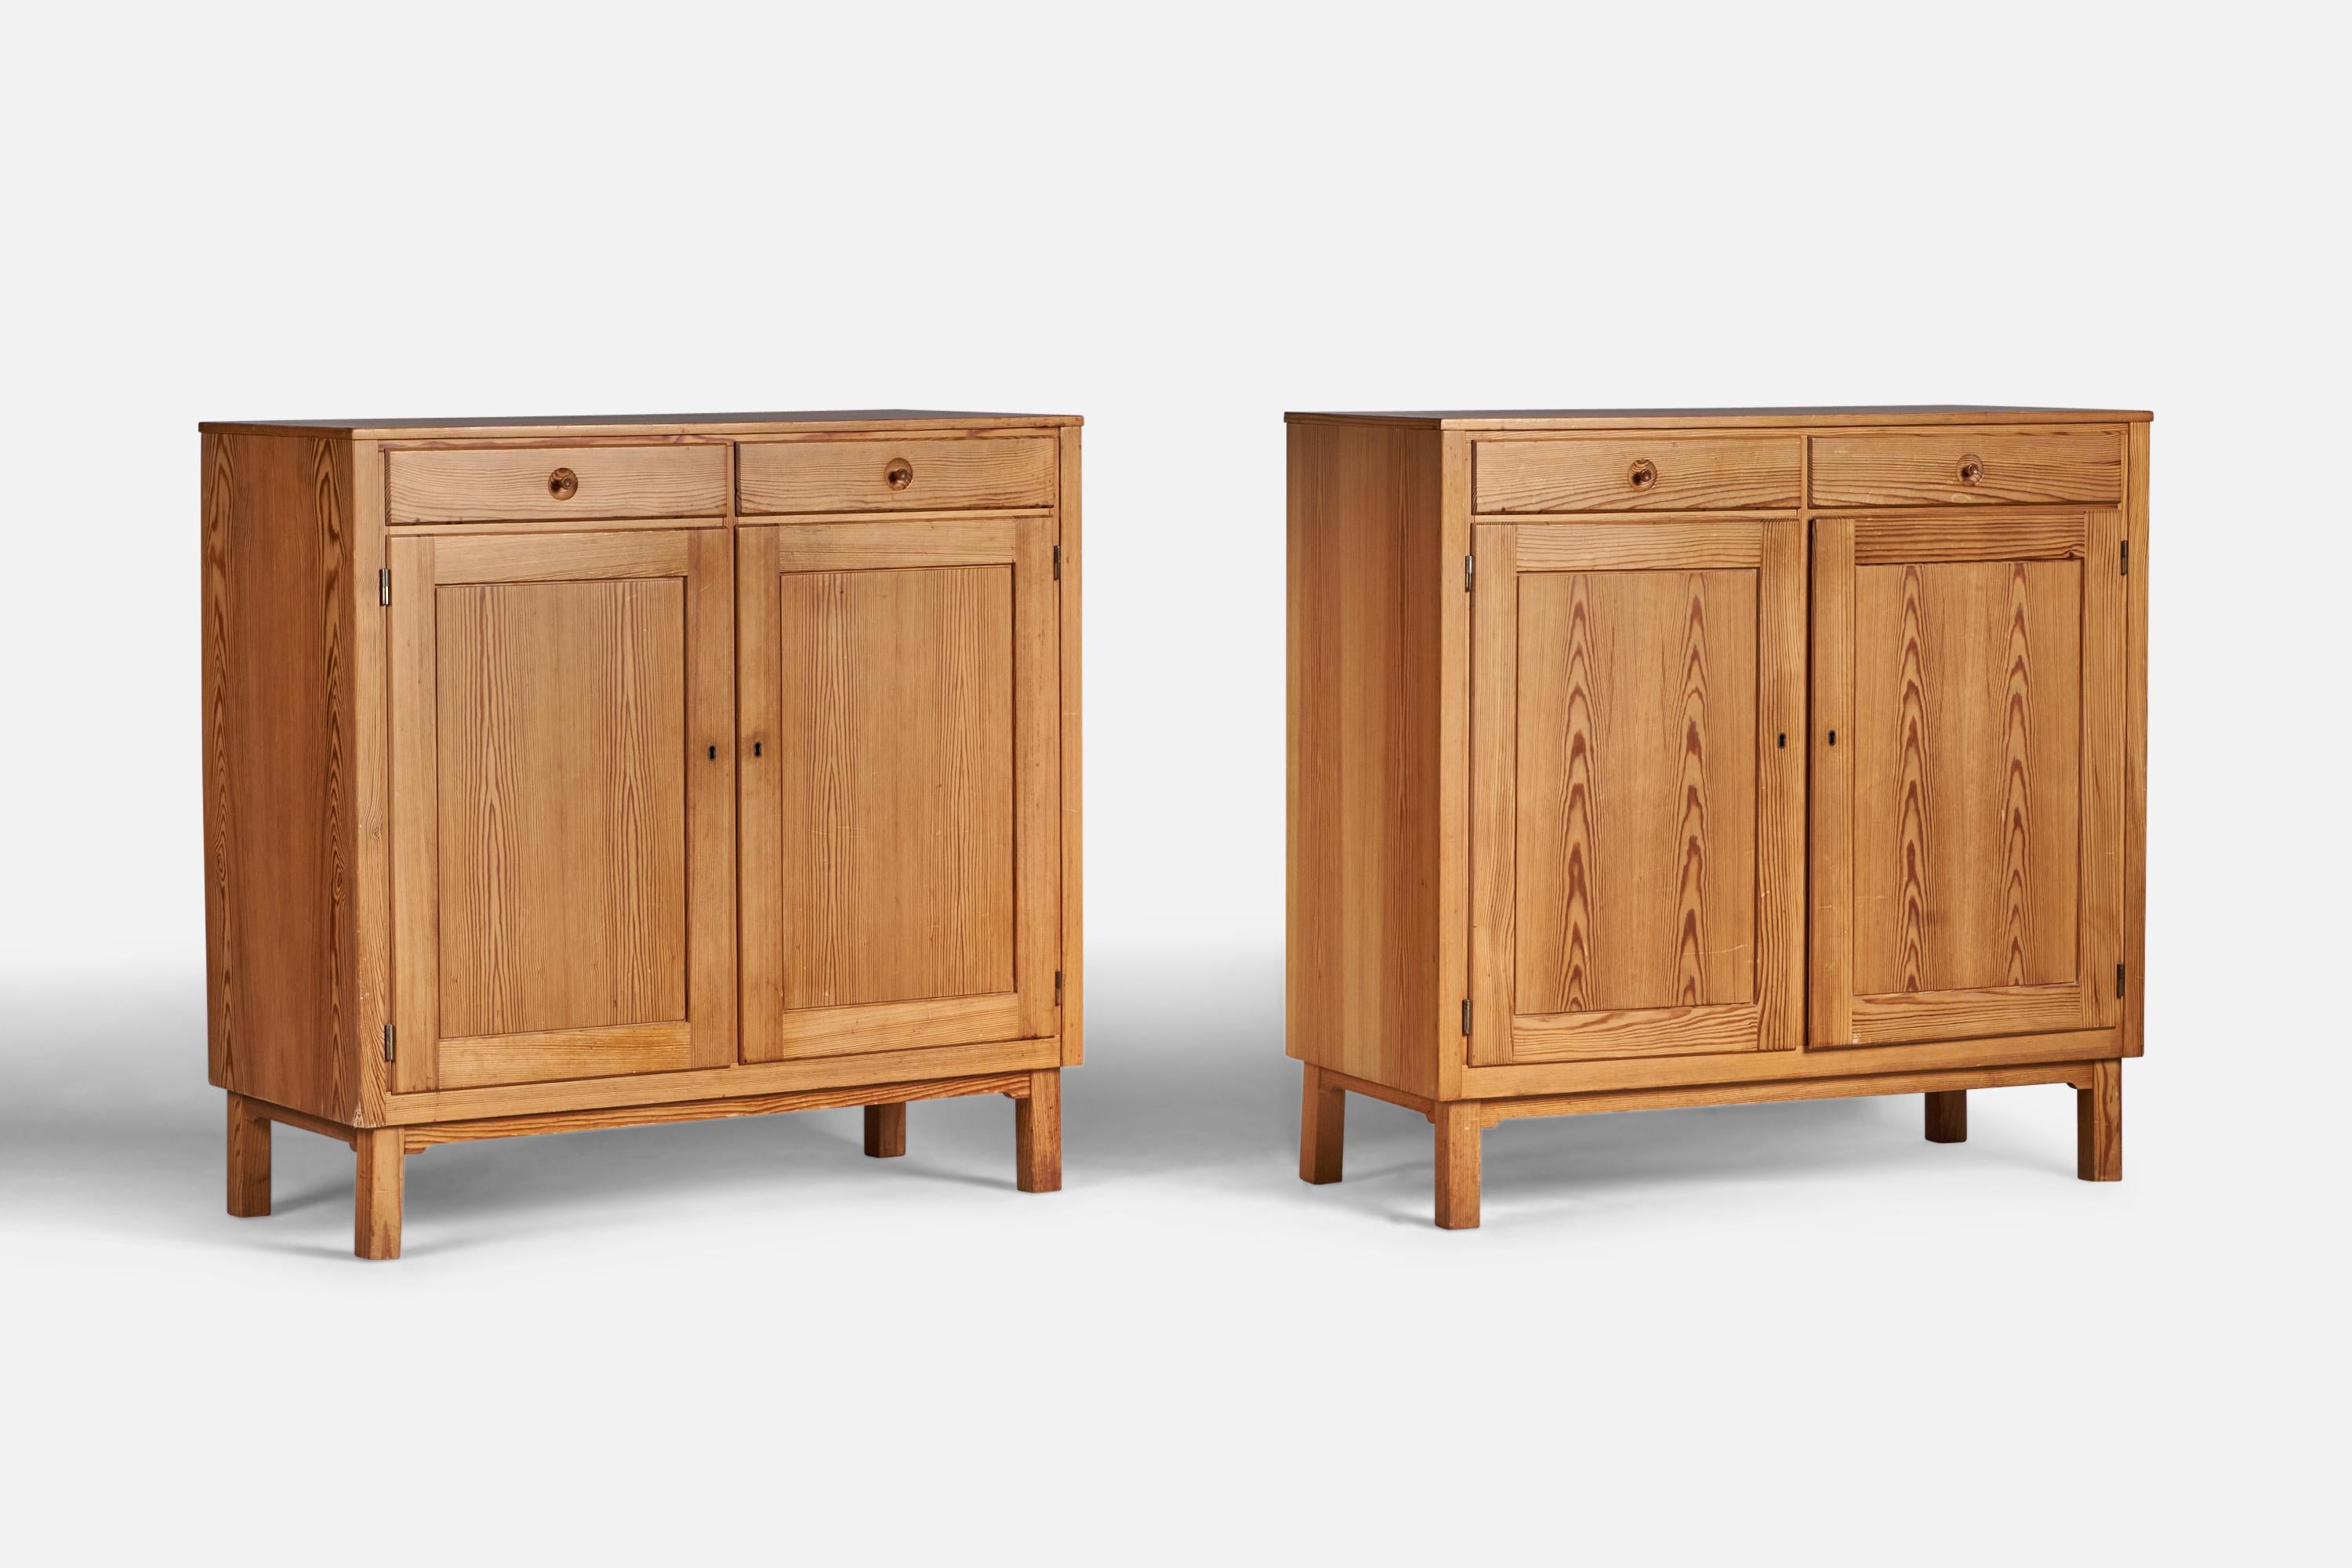 A pair of pine cabinets designed and produced in Sweden, 1960s.